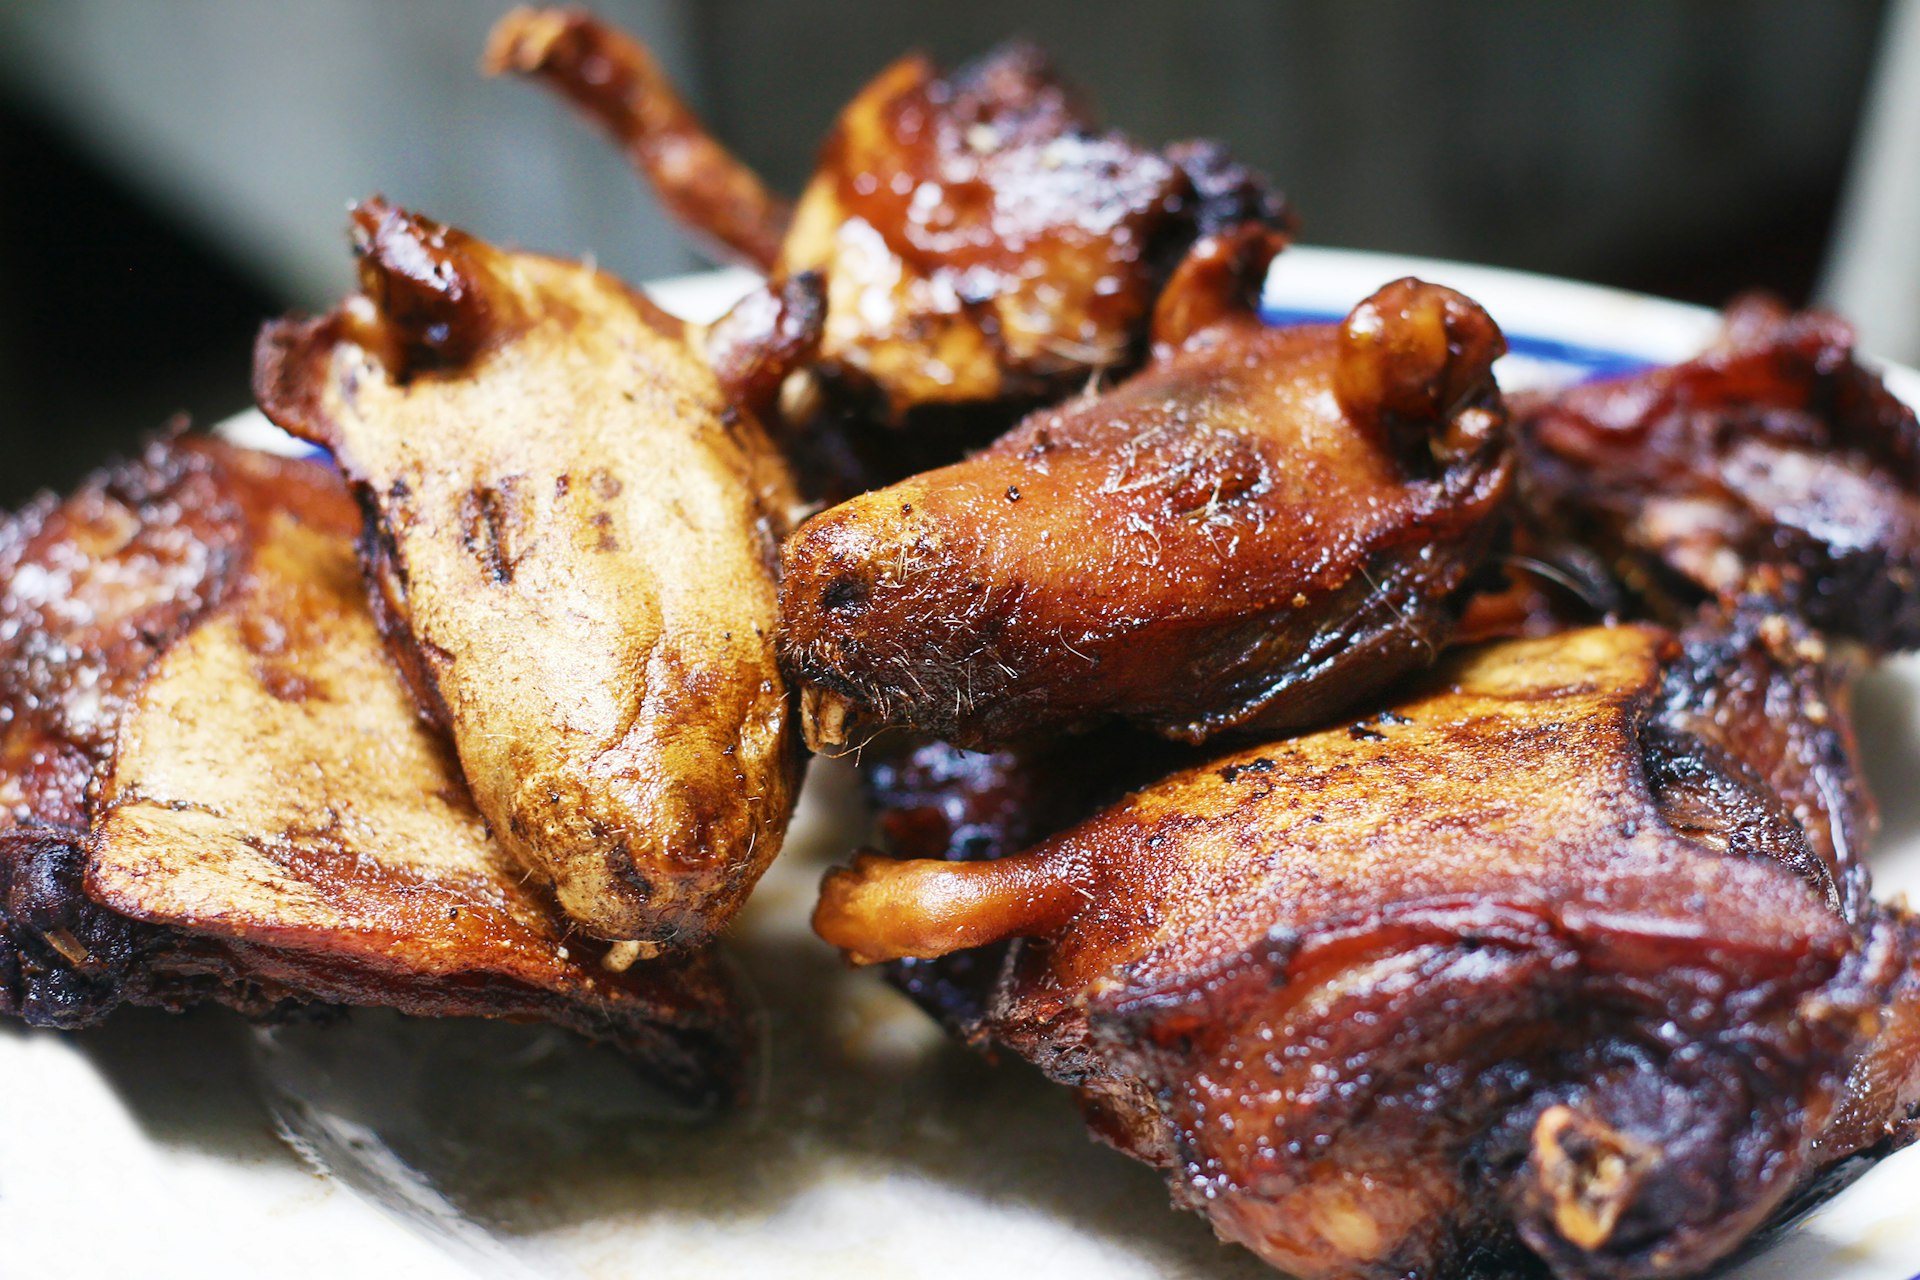 Features - Fried guinea pig